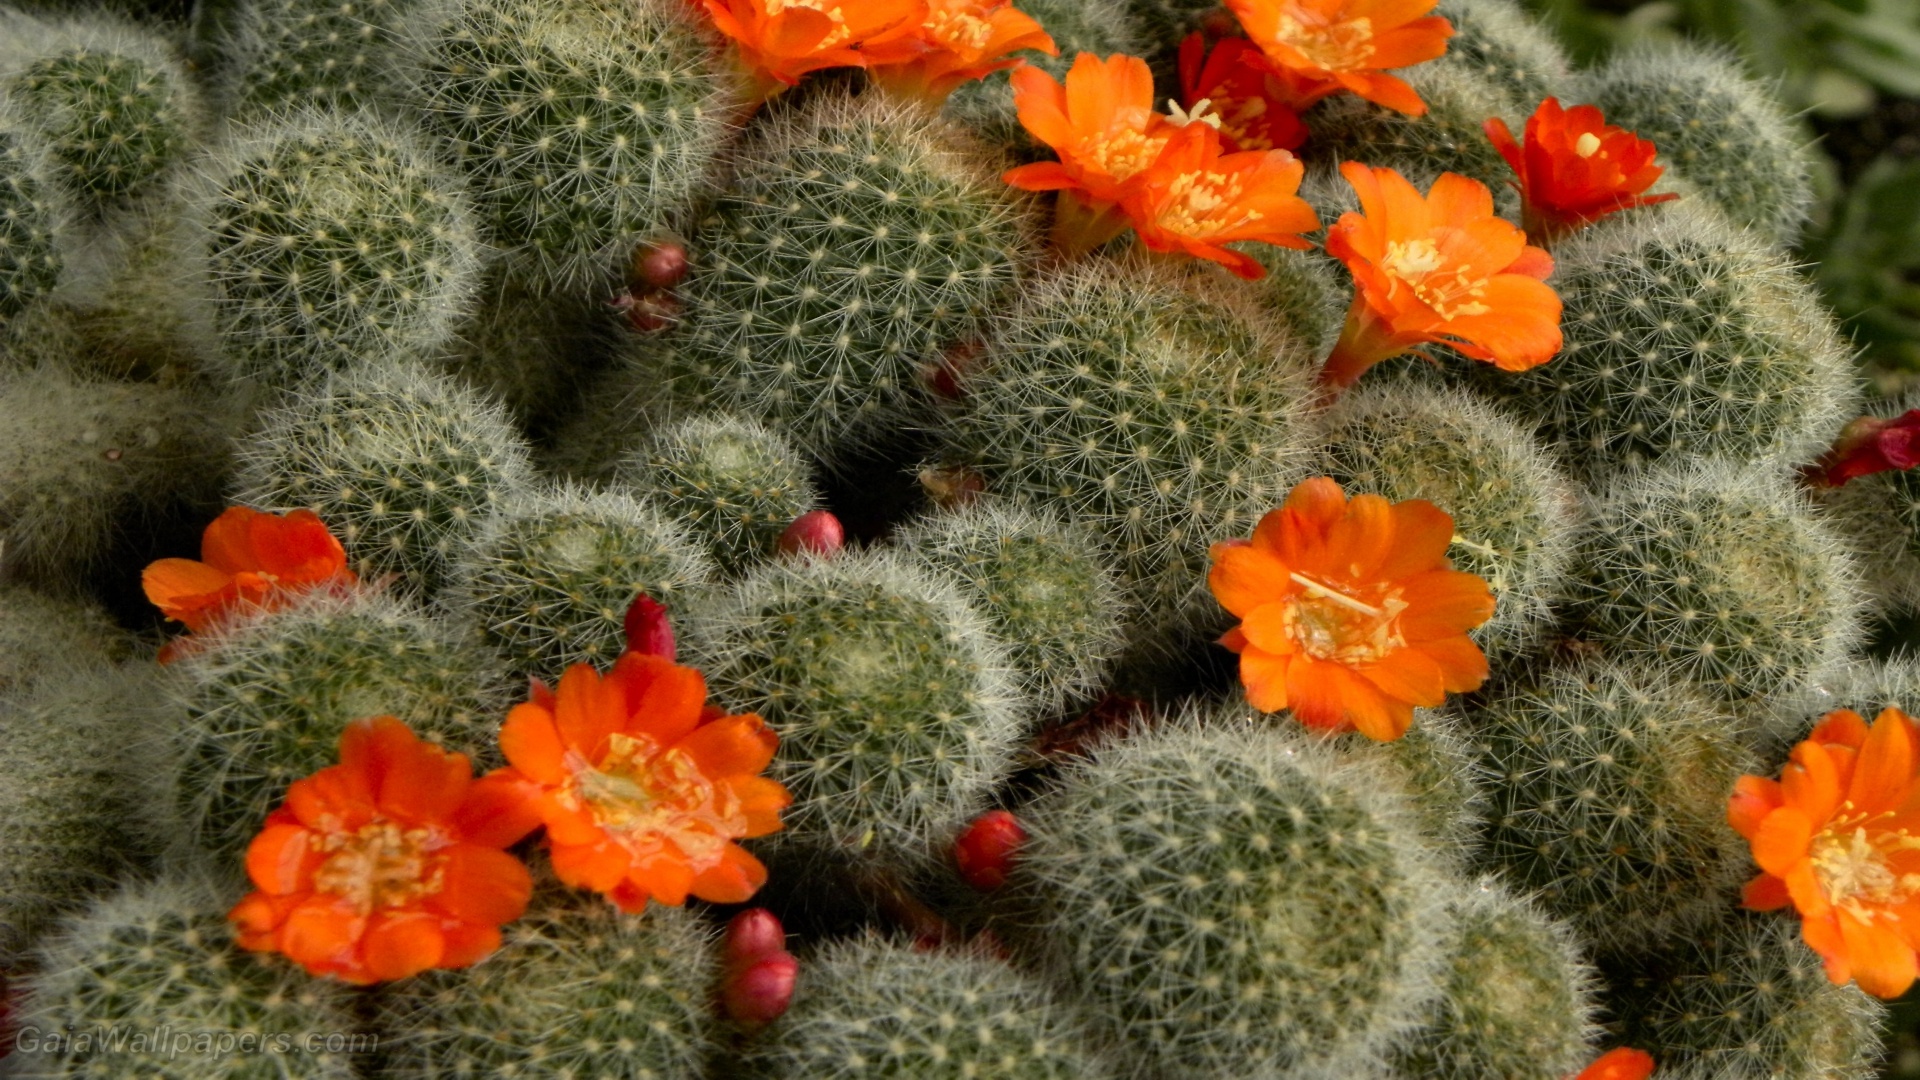 Cactus: Has adapted to dry environments by developing a number of unique features. 1920x1080 Full HD Wallpaper.